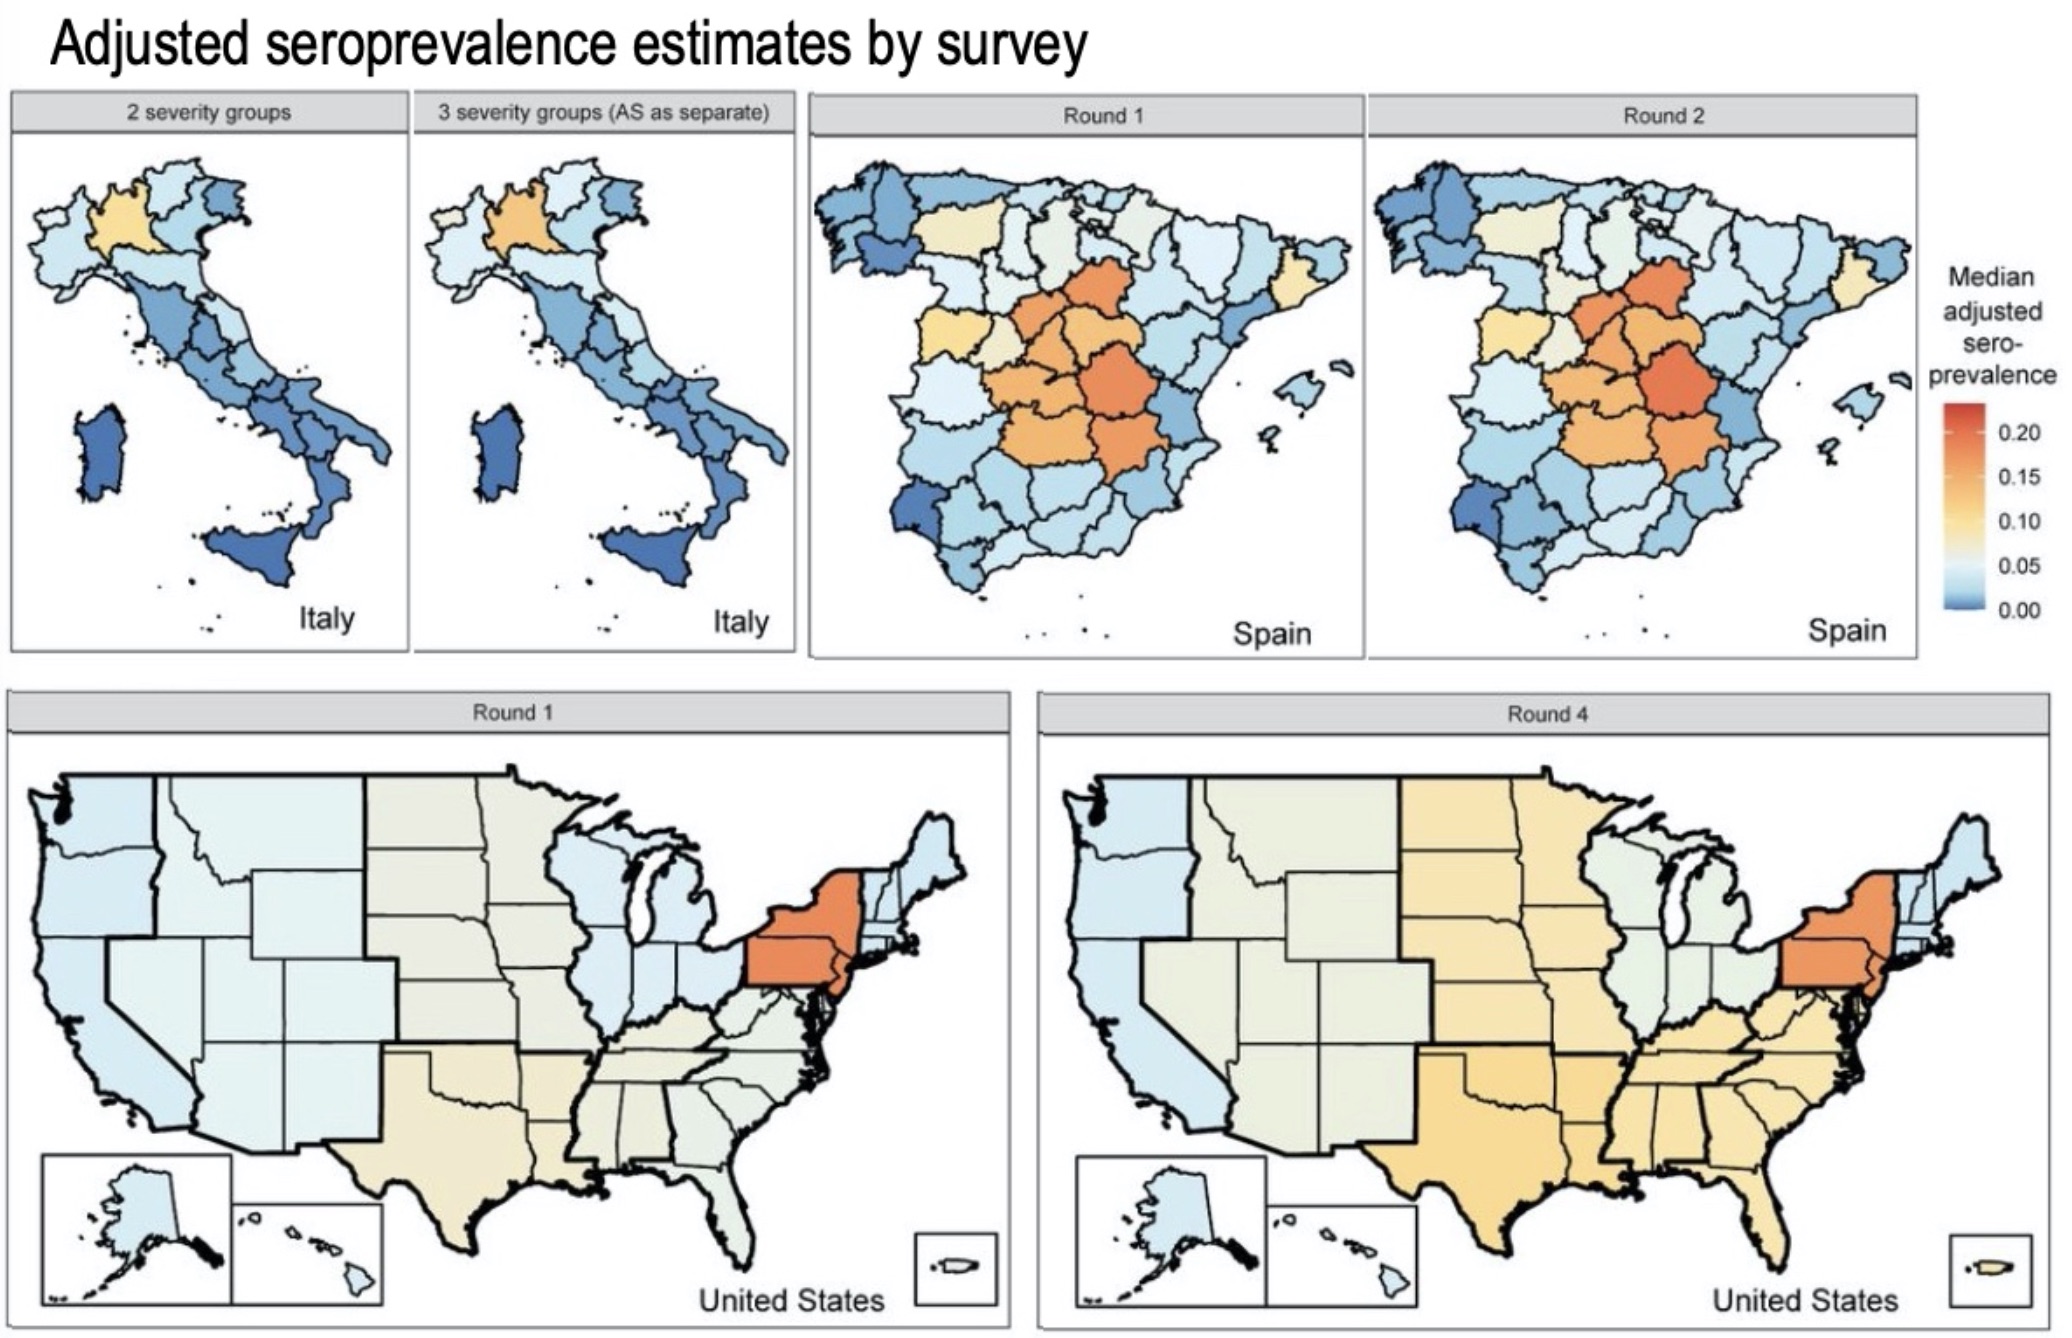 adjusted seroprevalence by survey maps of italy, US and Spain